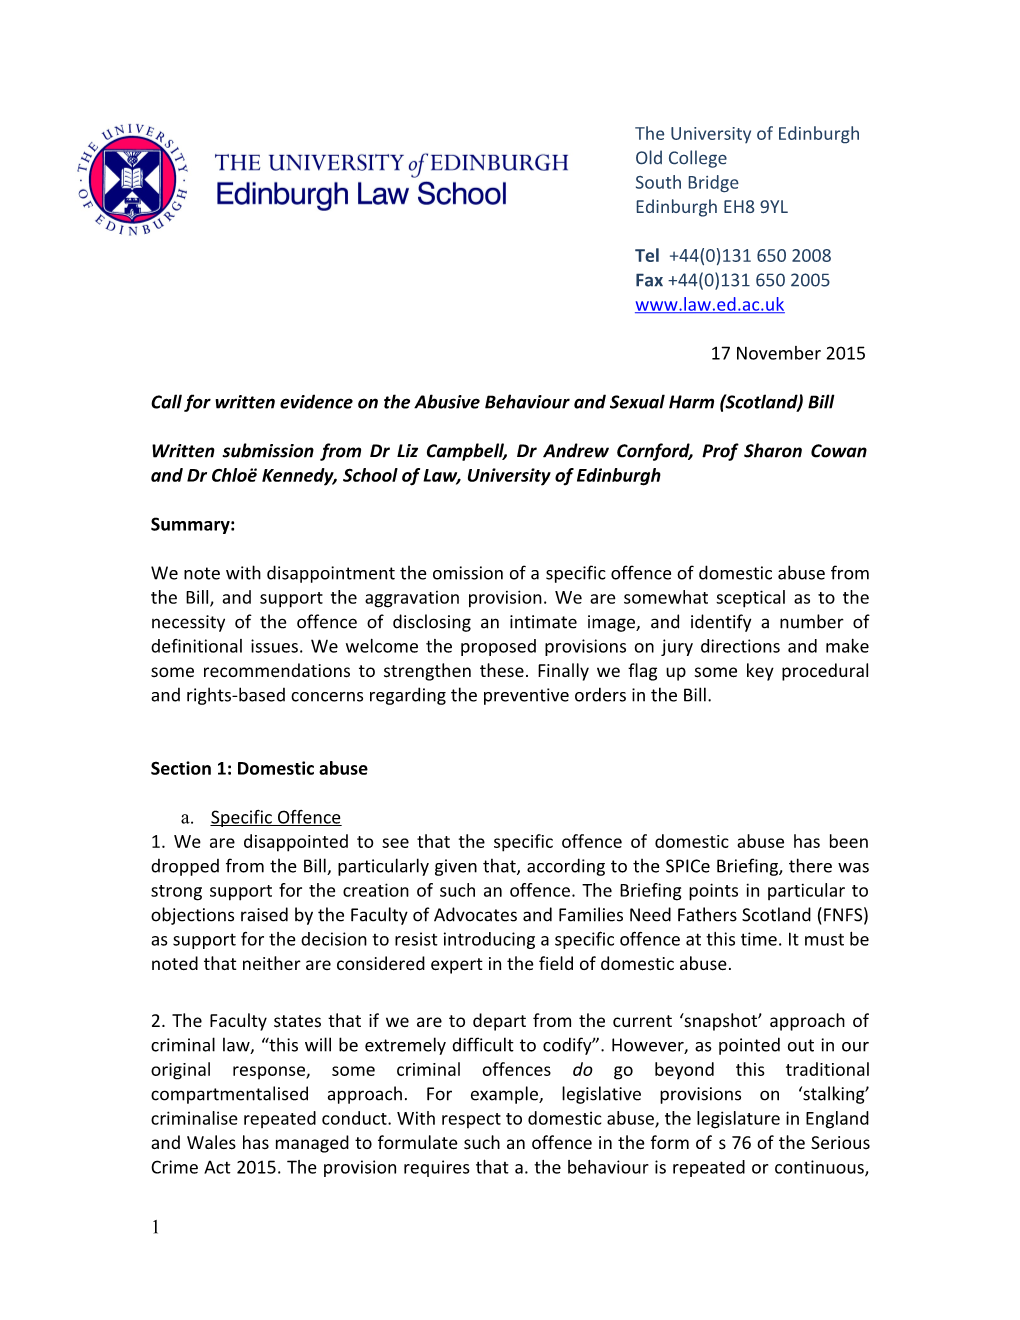 Call for Written Evidence on the Abusive Behaviour and Sexual Harm (Scotland) Bill